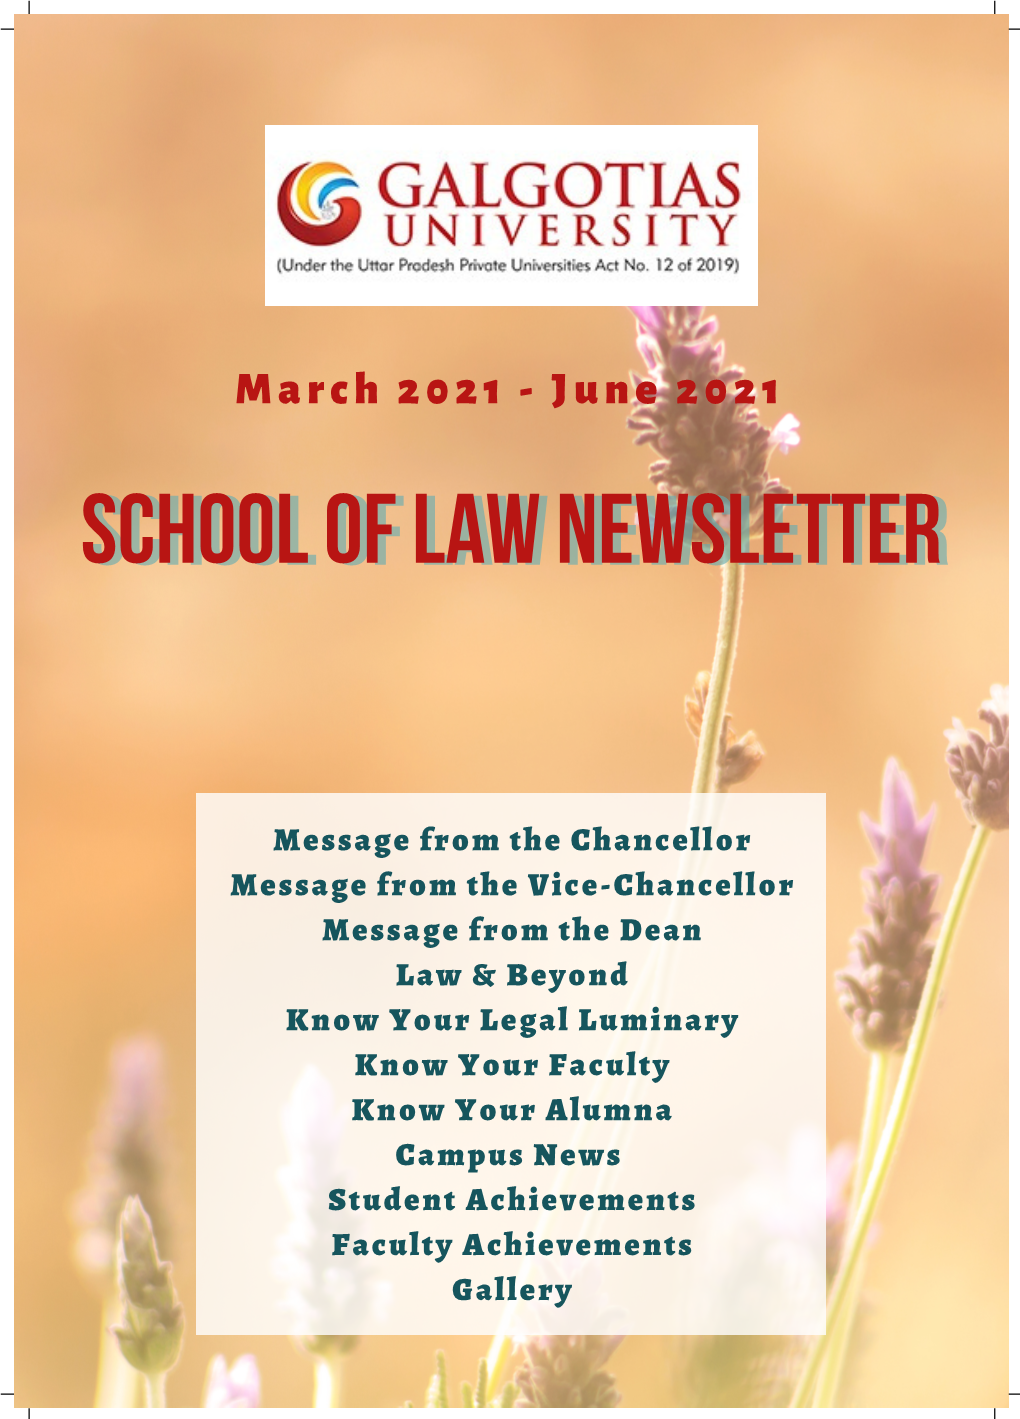 School of Law Newsletter Which Will Make the Readers Acquainted with the Relevant National and International Legal Issues and the Events Organized by the SOL